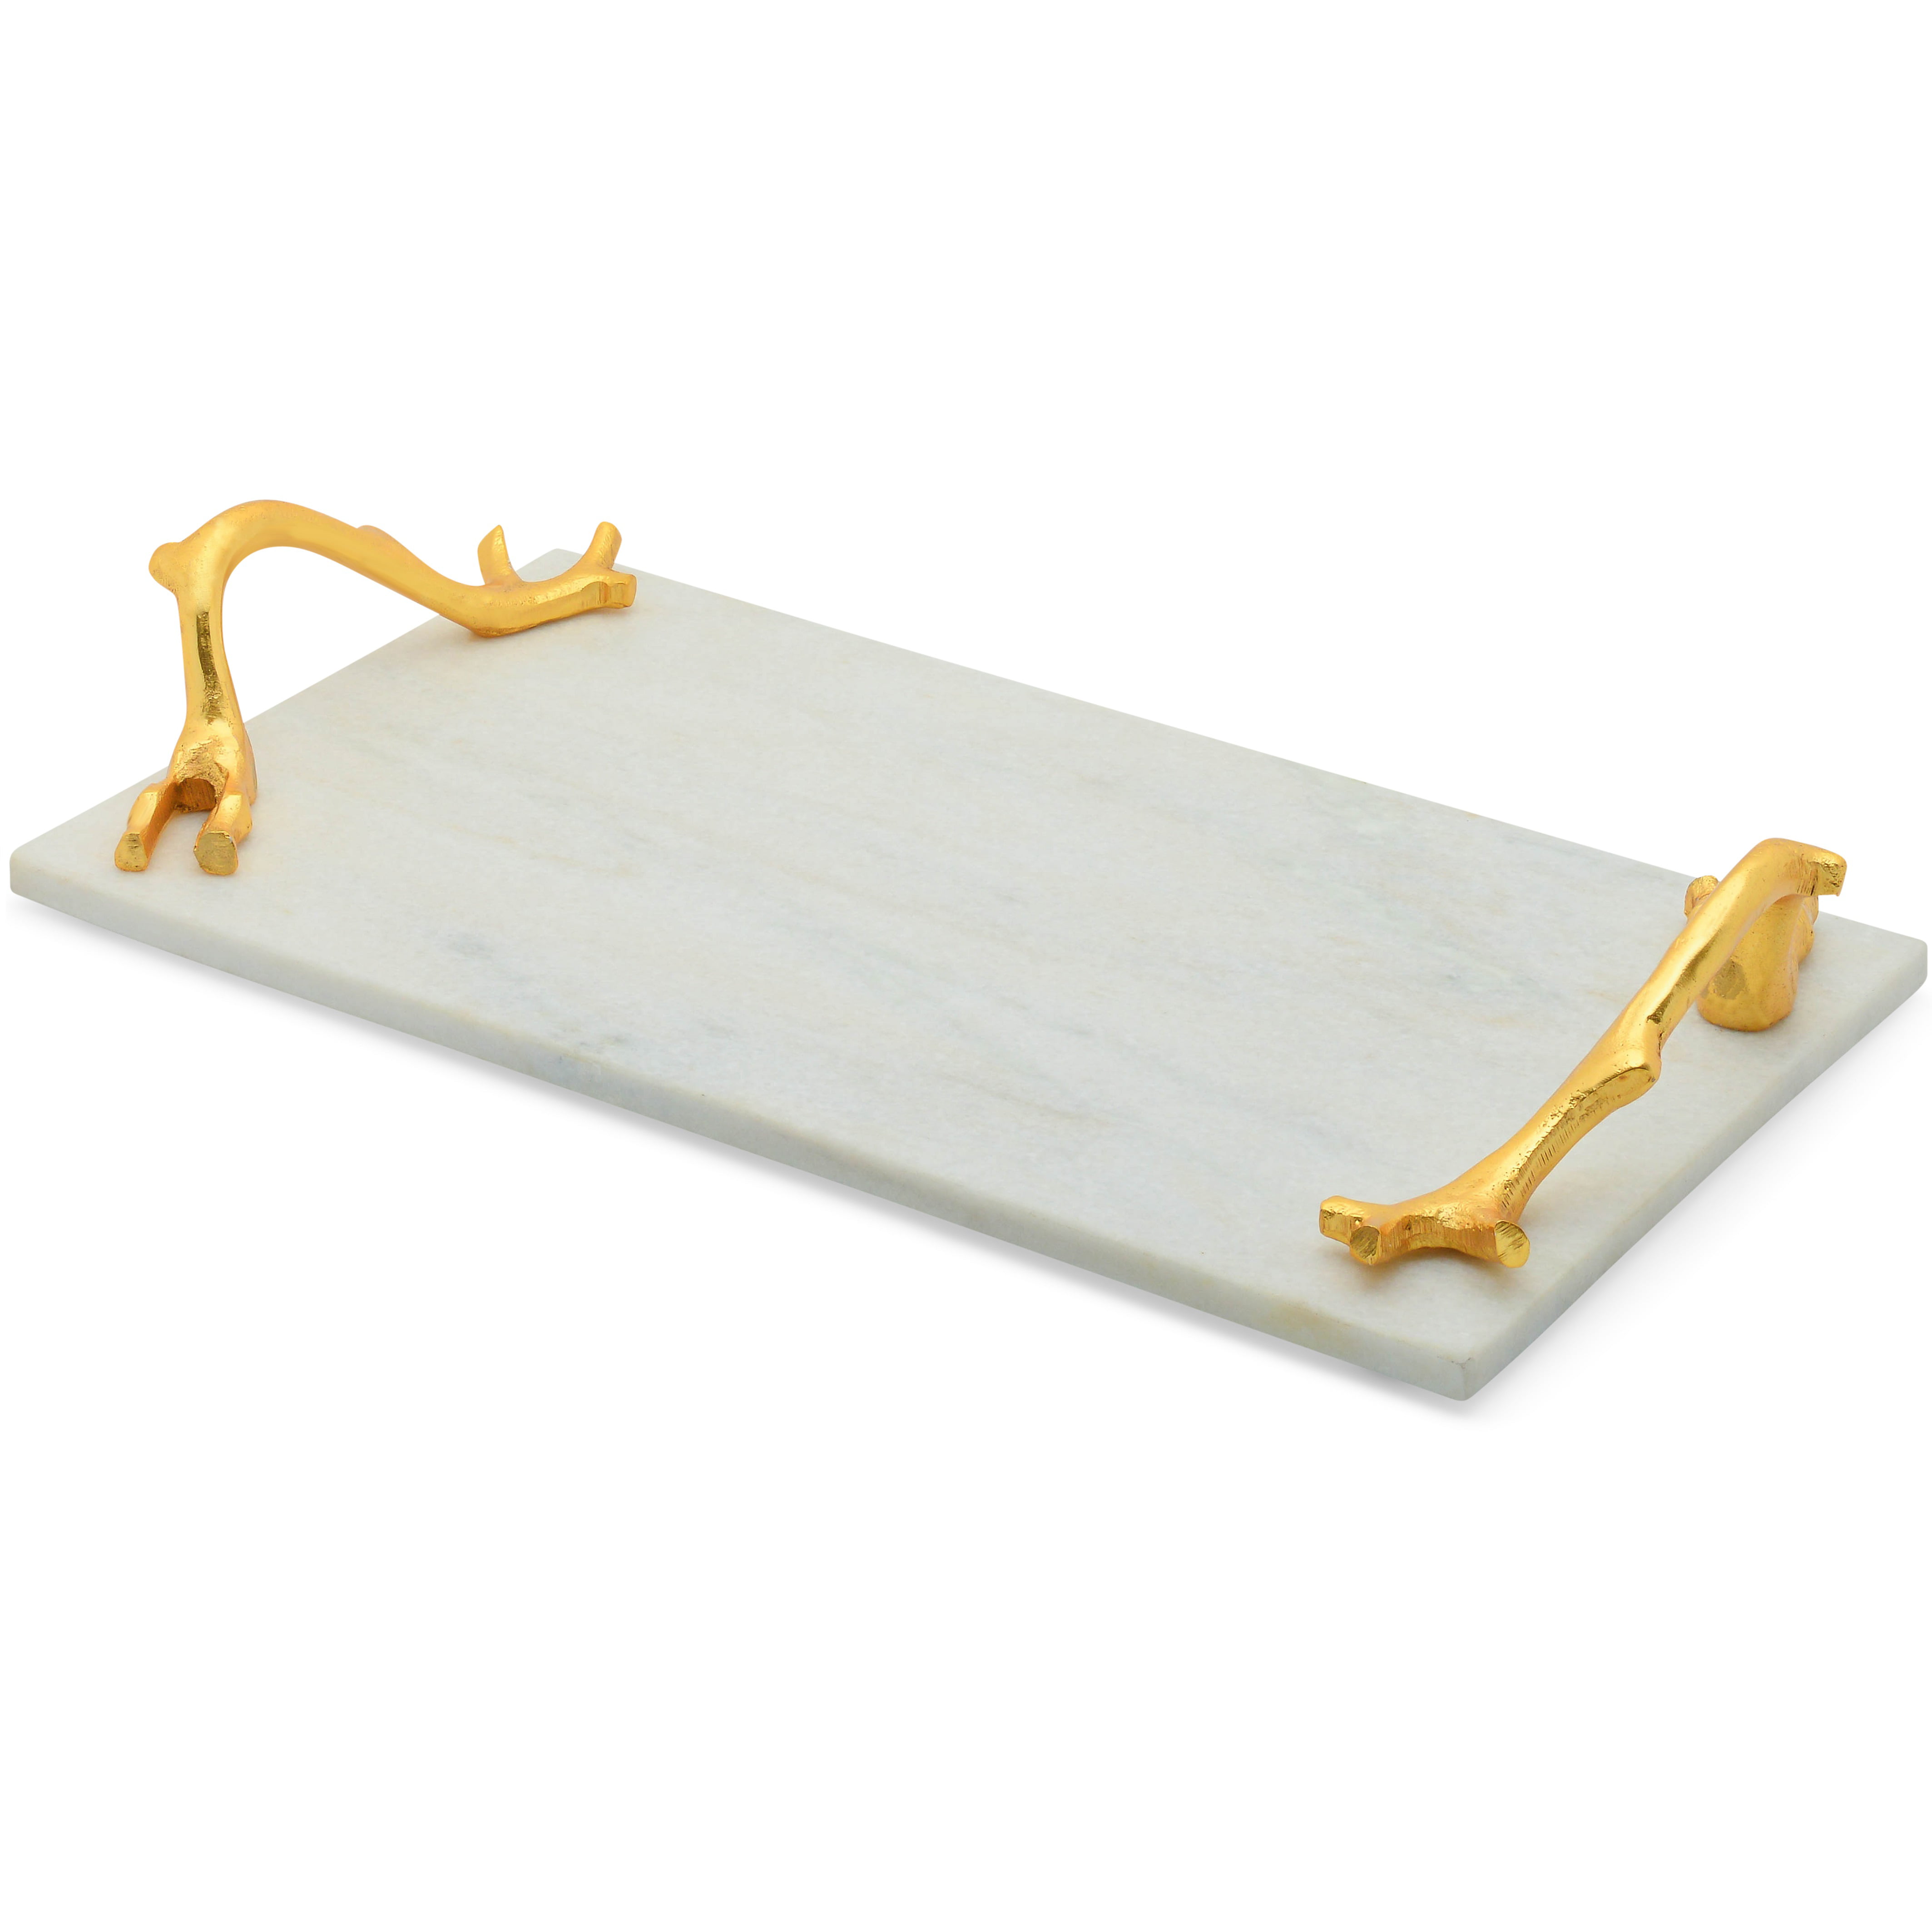 Cheer Collection White Marble Tray with Gold Plated Handles Large and Sleek Stone Tray for